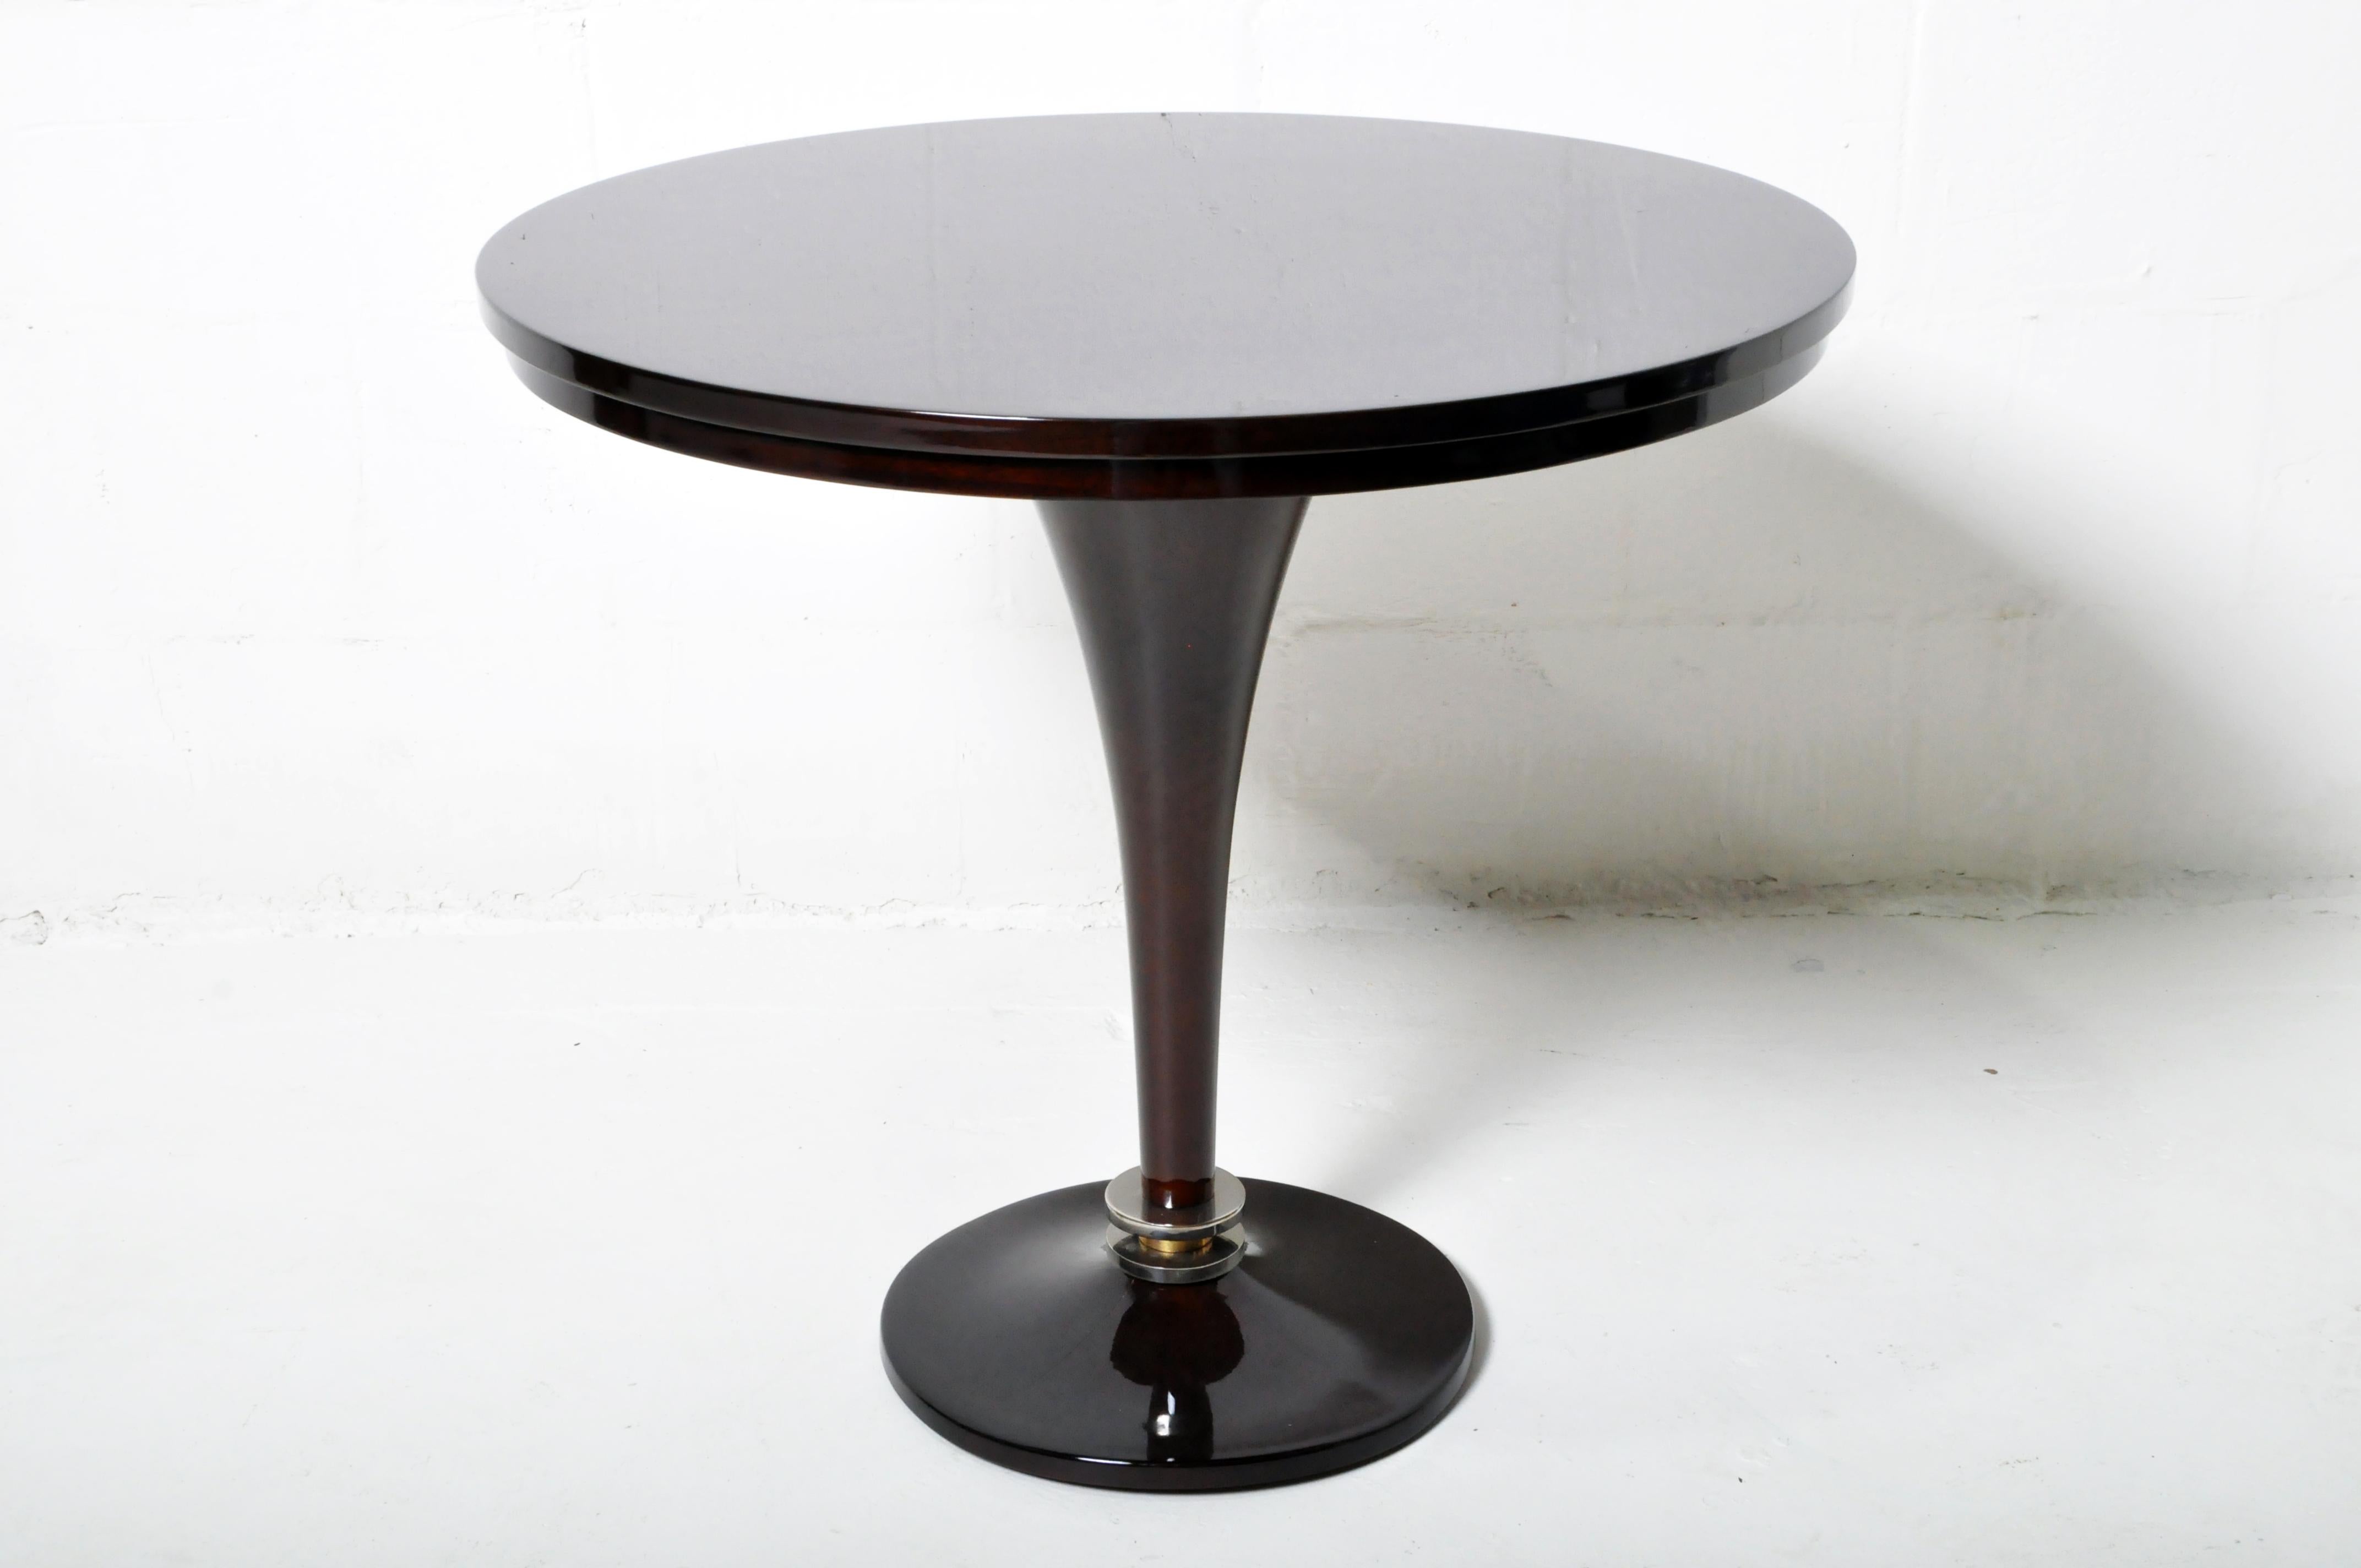 A dark lacquer-on-walnut veneer pedestal side table from a Hungarian atelier. The original design inspiration is French Art Deco. Many Hungarian Art Deco pieces are quite similar to French and Italian Art Deco designs. In fact, the Hungarians have